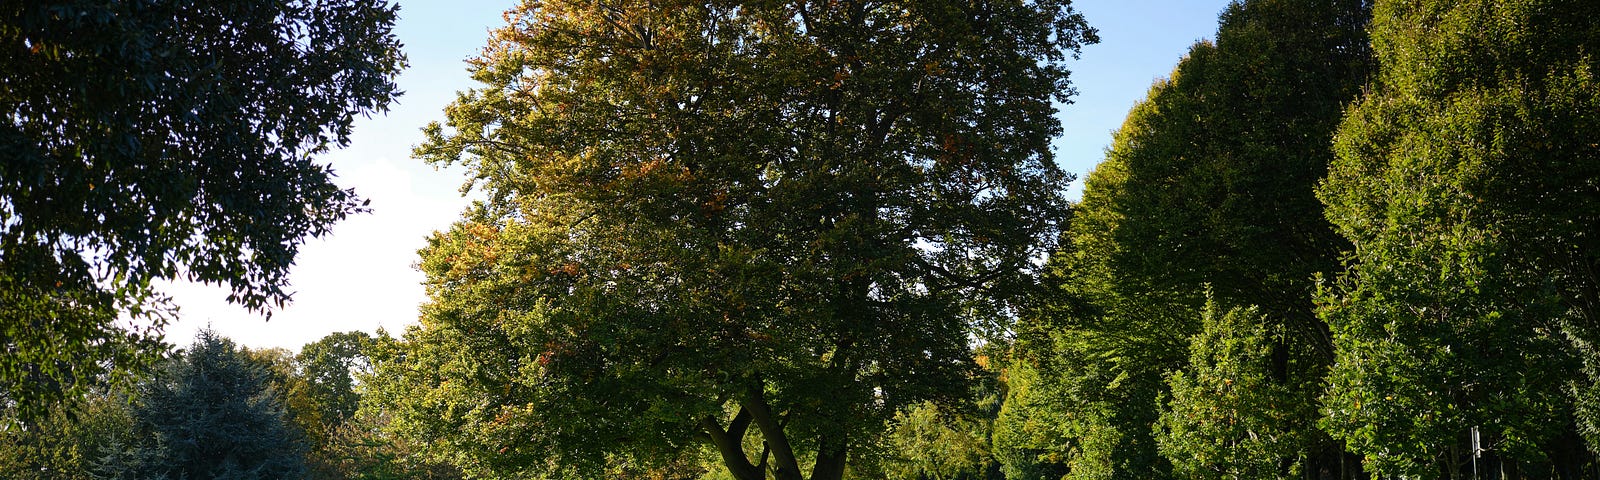 Photo of a tall, climbable tree in a park.